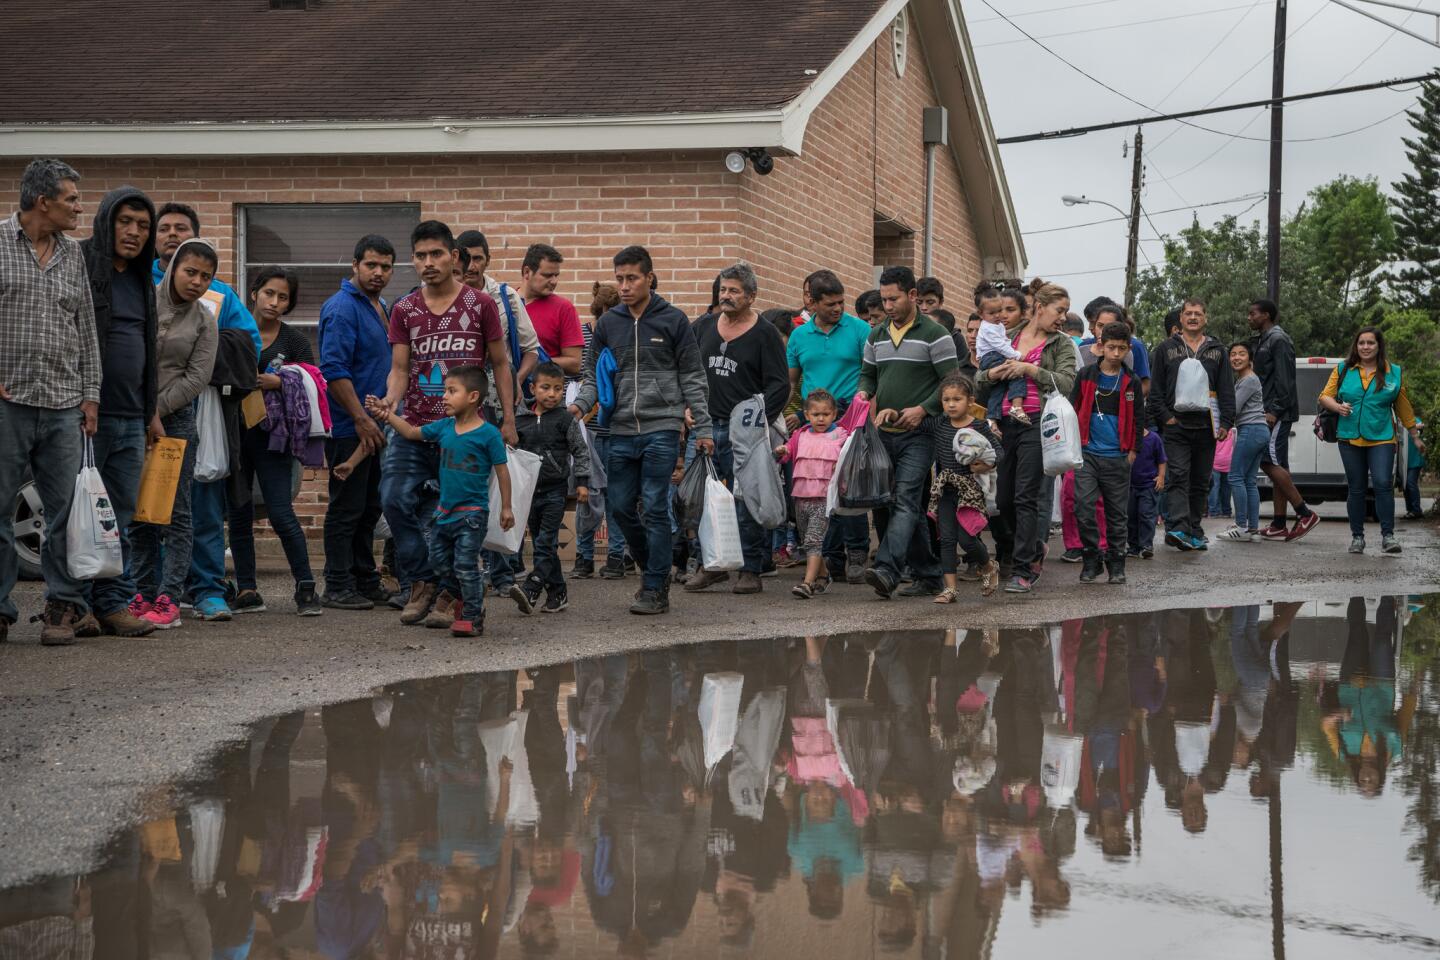 Central American migrants arrive at a Catholic Charities respite center on Wednesday, March 20, 2019 in McAllen, Texas. The migrant families passing through the respite center continue on to various parts of the country, where they await future court dates to determine whether they'll be permitted to stay in the U.S.